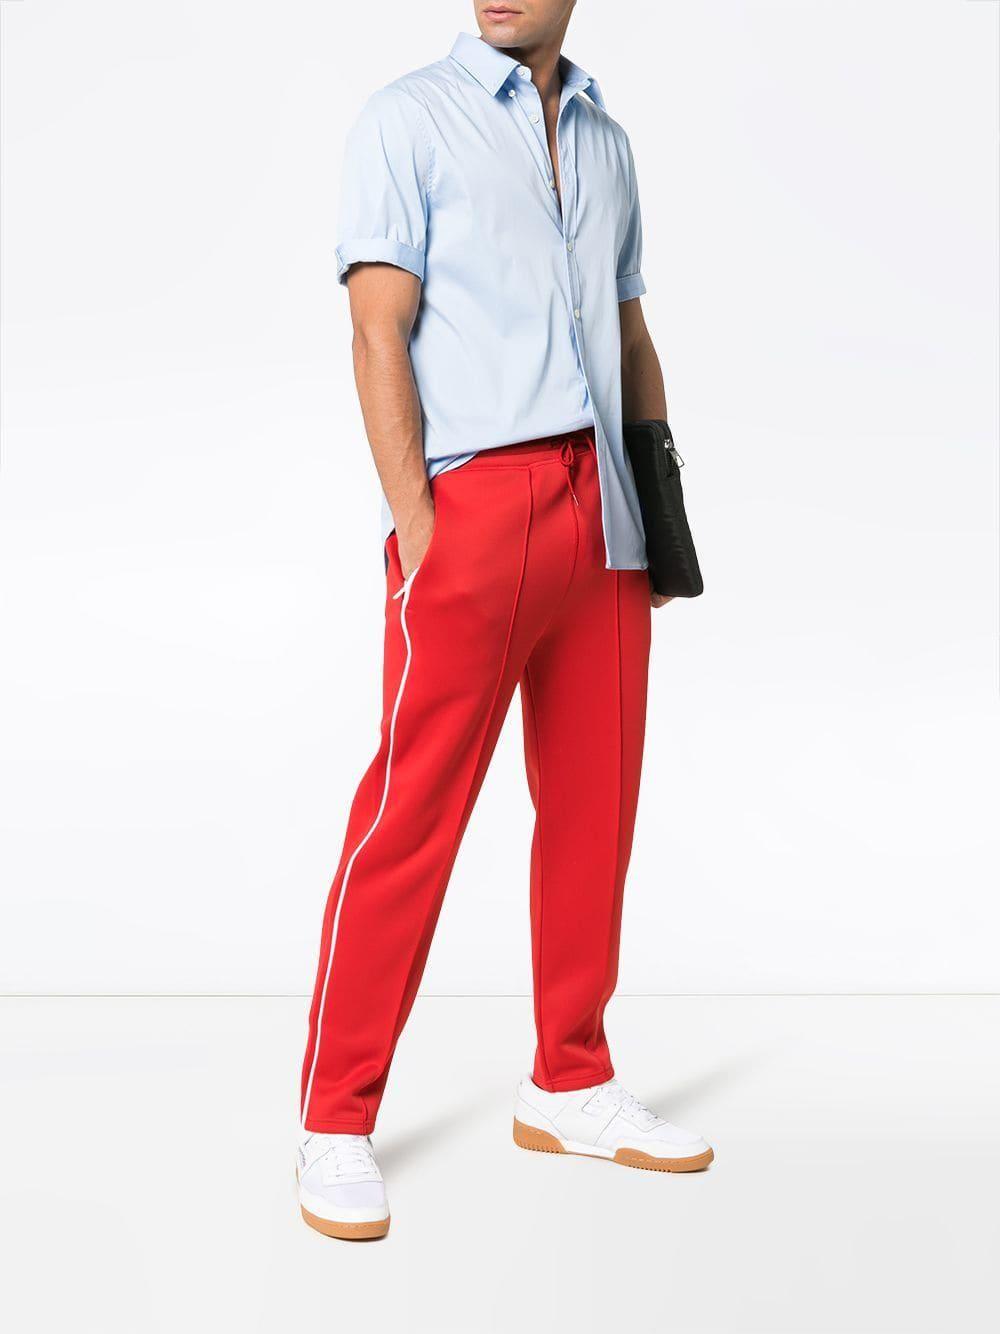 Red Person Logo - Kenzo Red Logo Print Cotton Blend Sweat Pants in Red for Men